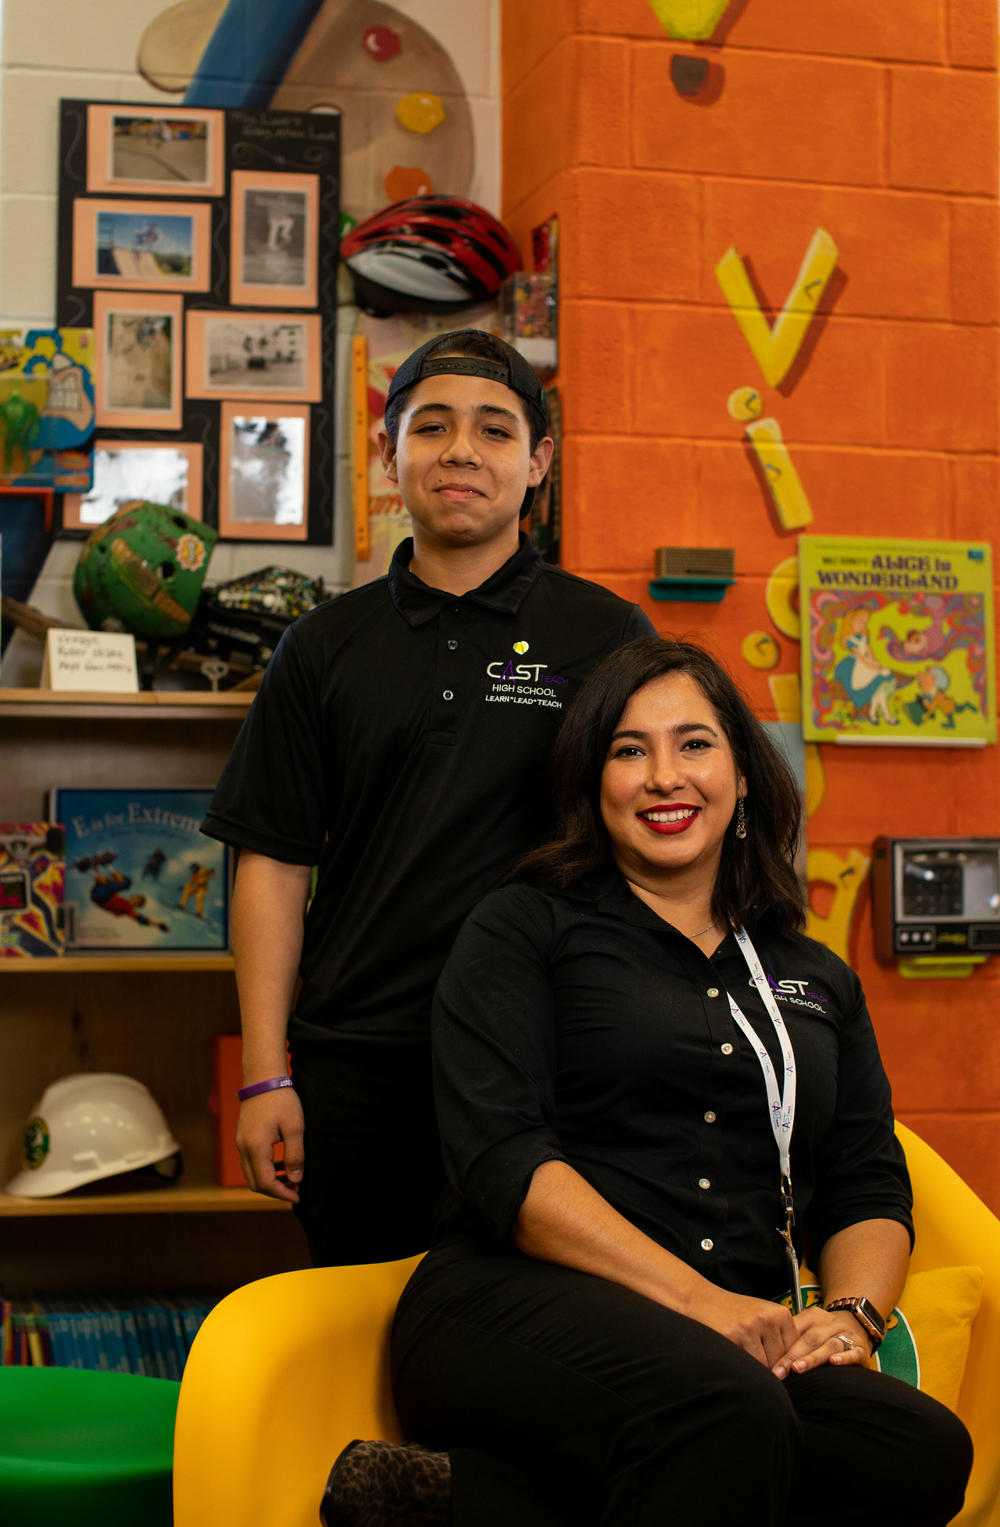 CAST Teach student Christopher Olivarez surprised his mother, Ericka Olivarez, when he enrolled in the teaching high school she helped create.